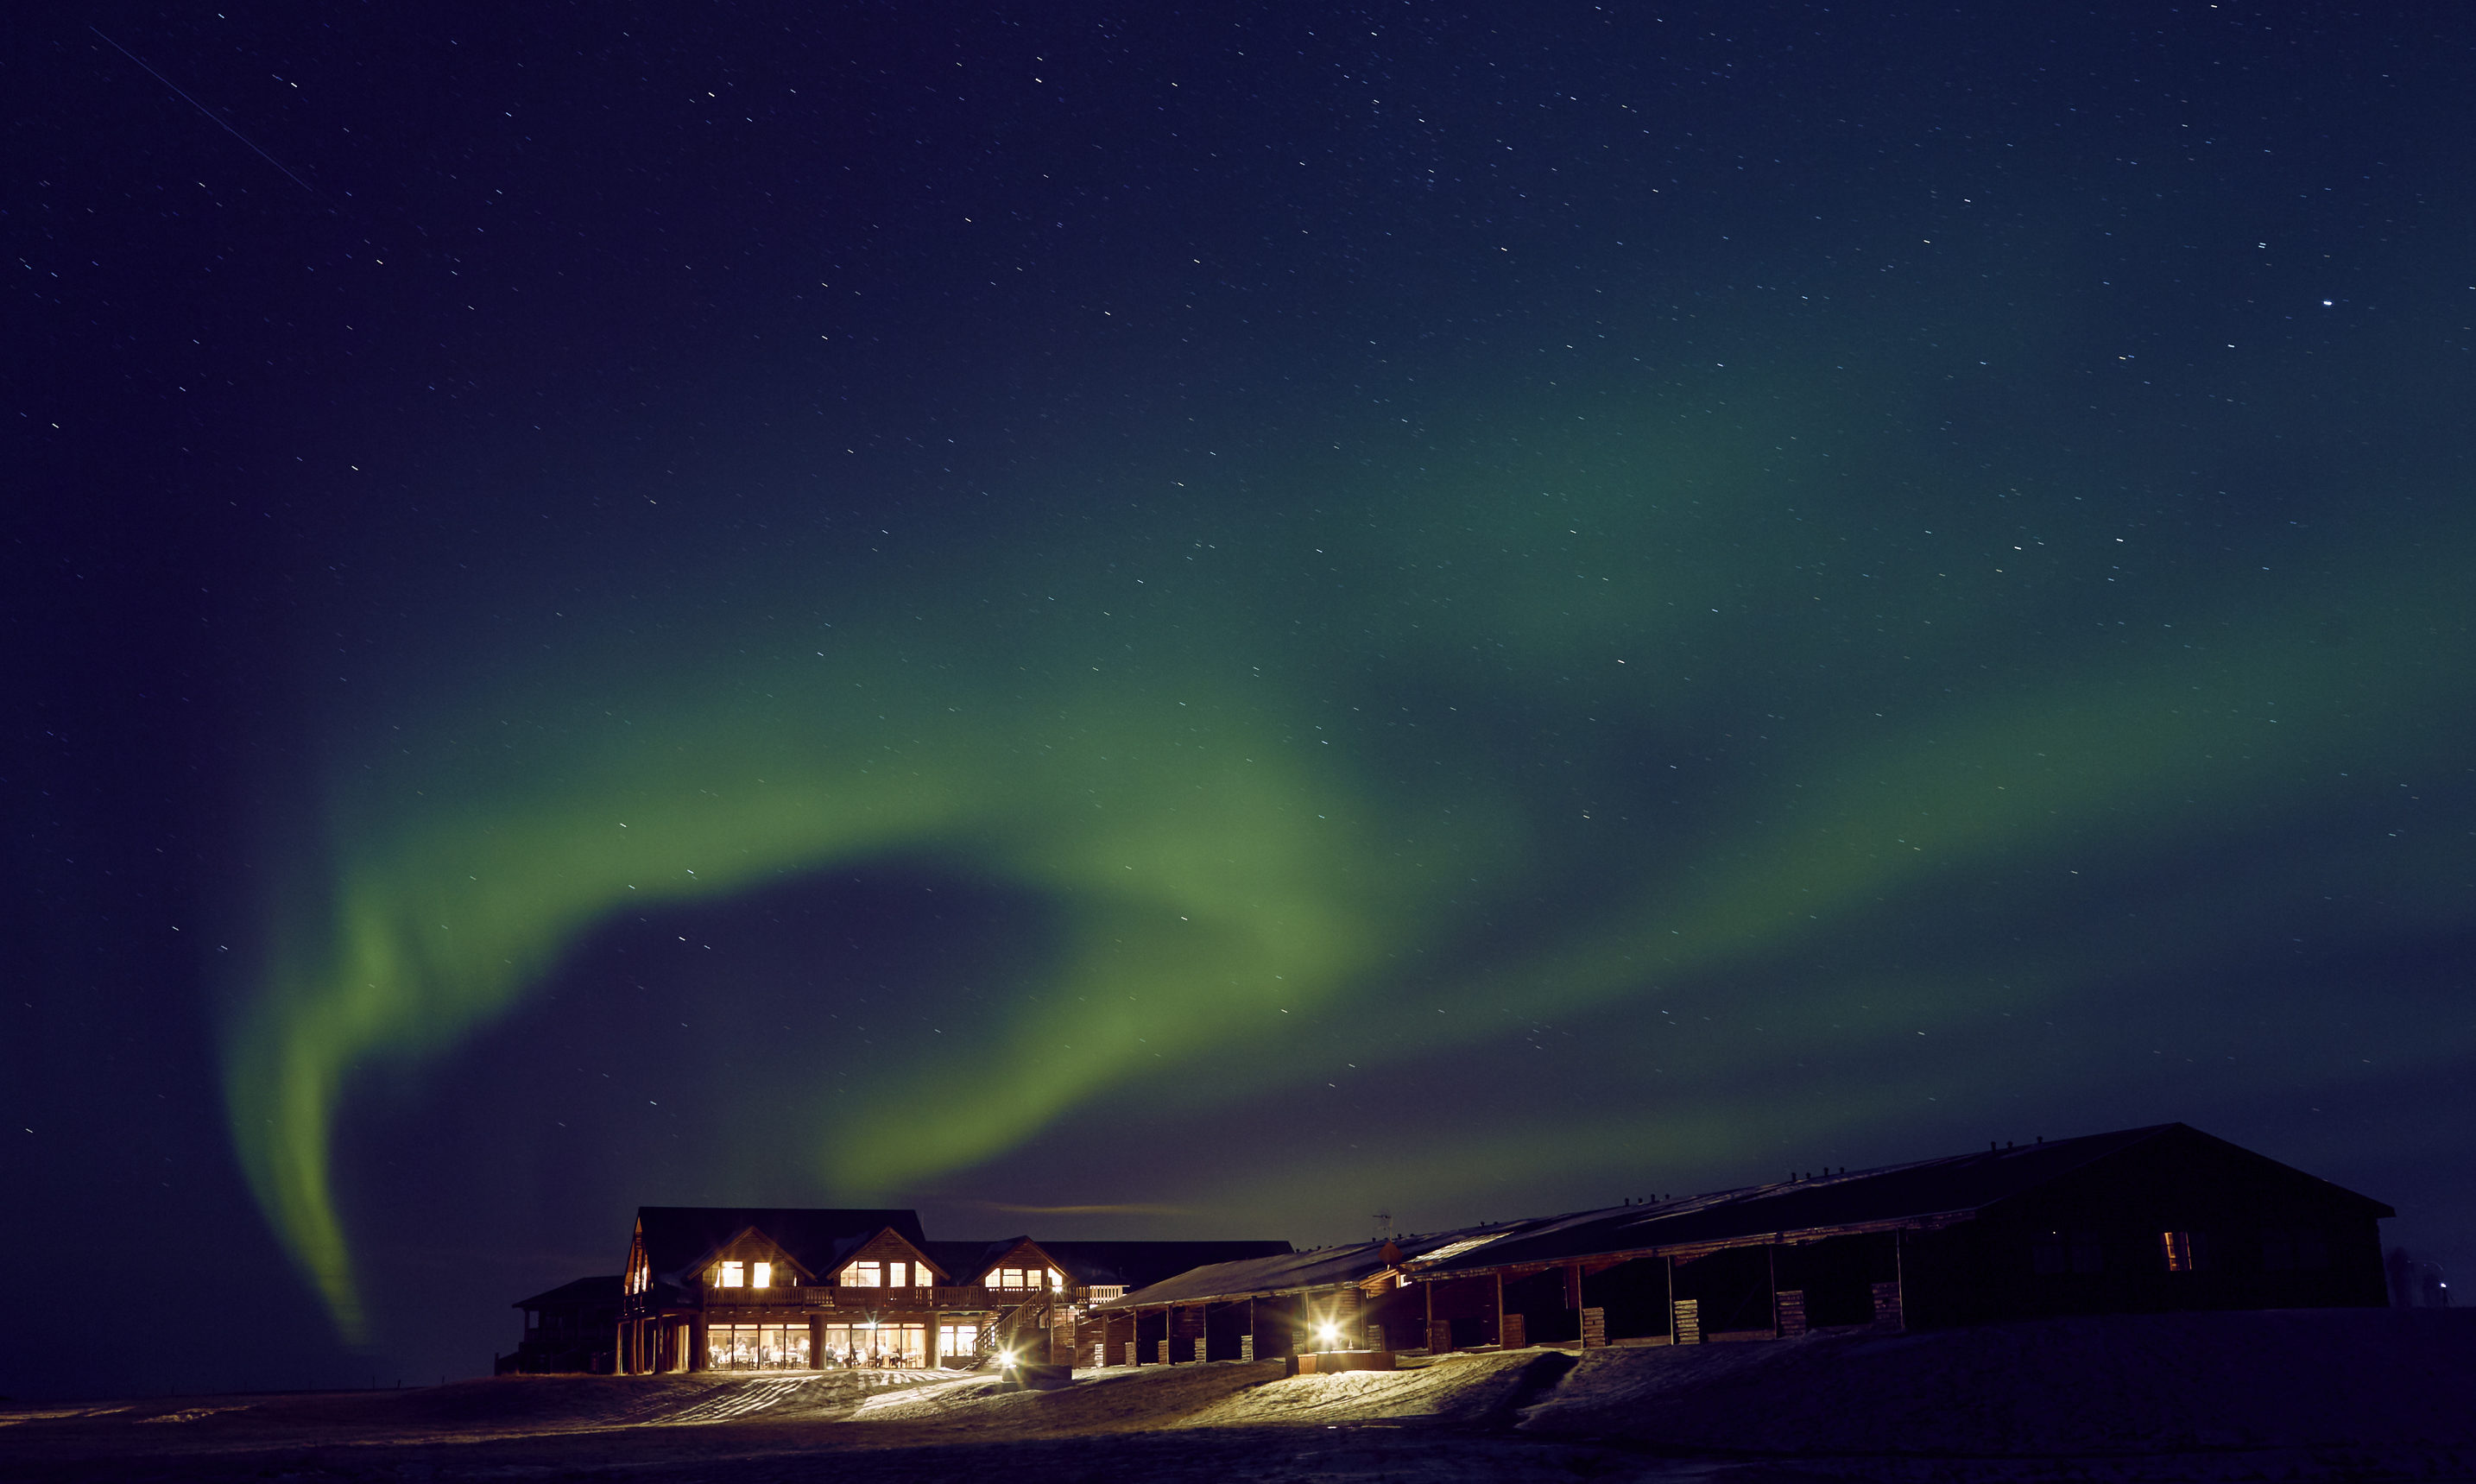 The Hotel Rangá is the ideal base for checking out the beauty of Iceland’s natural wonders